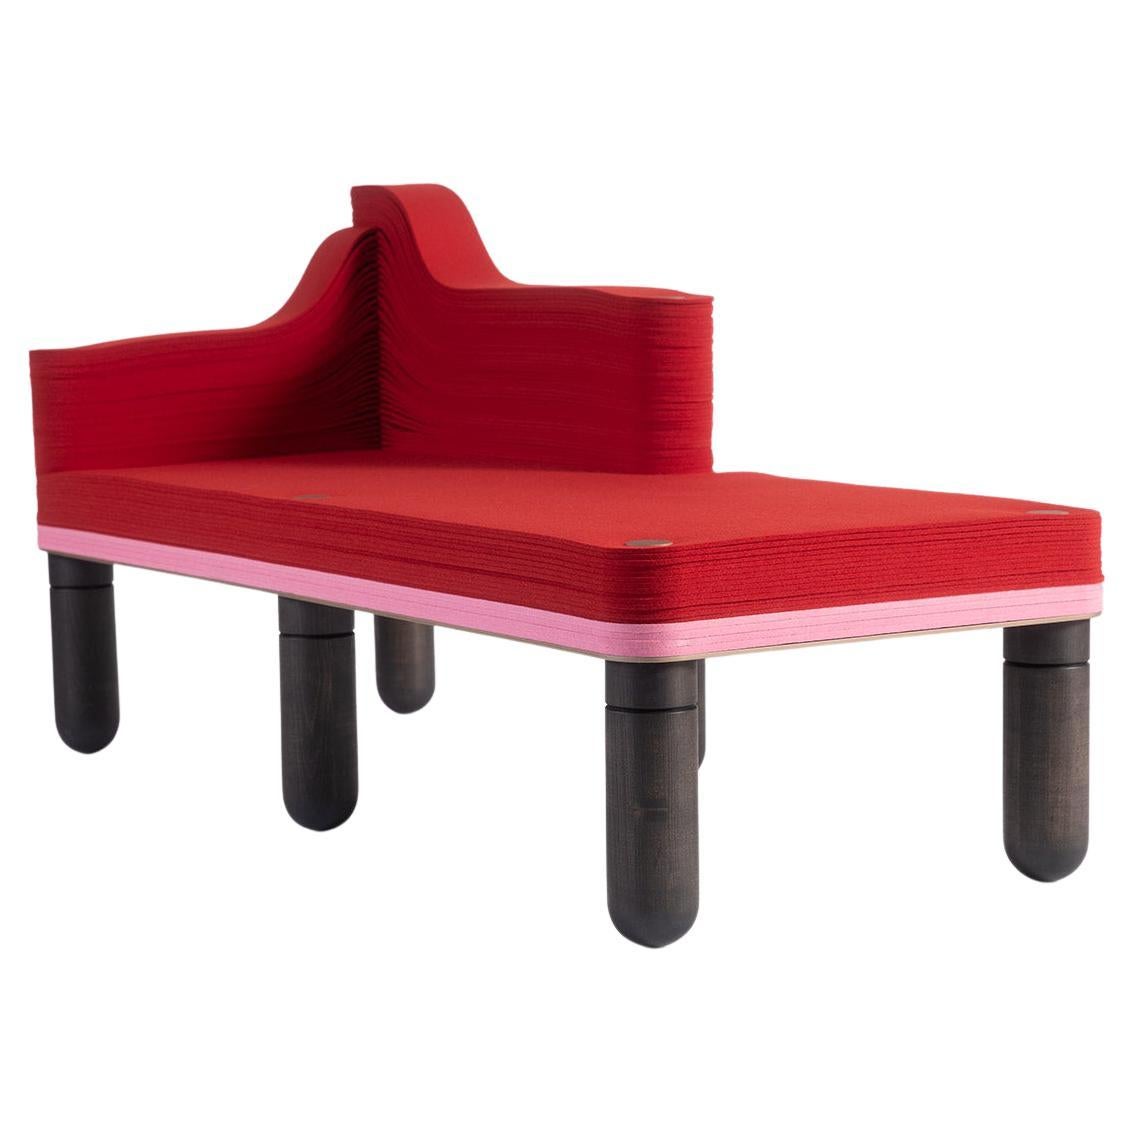 Madame G, Felt and Wood Chaise Lounge, Drake / Anderson in Stackabl For Sale